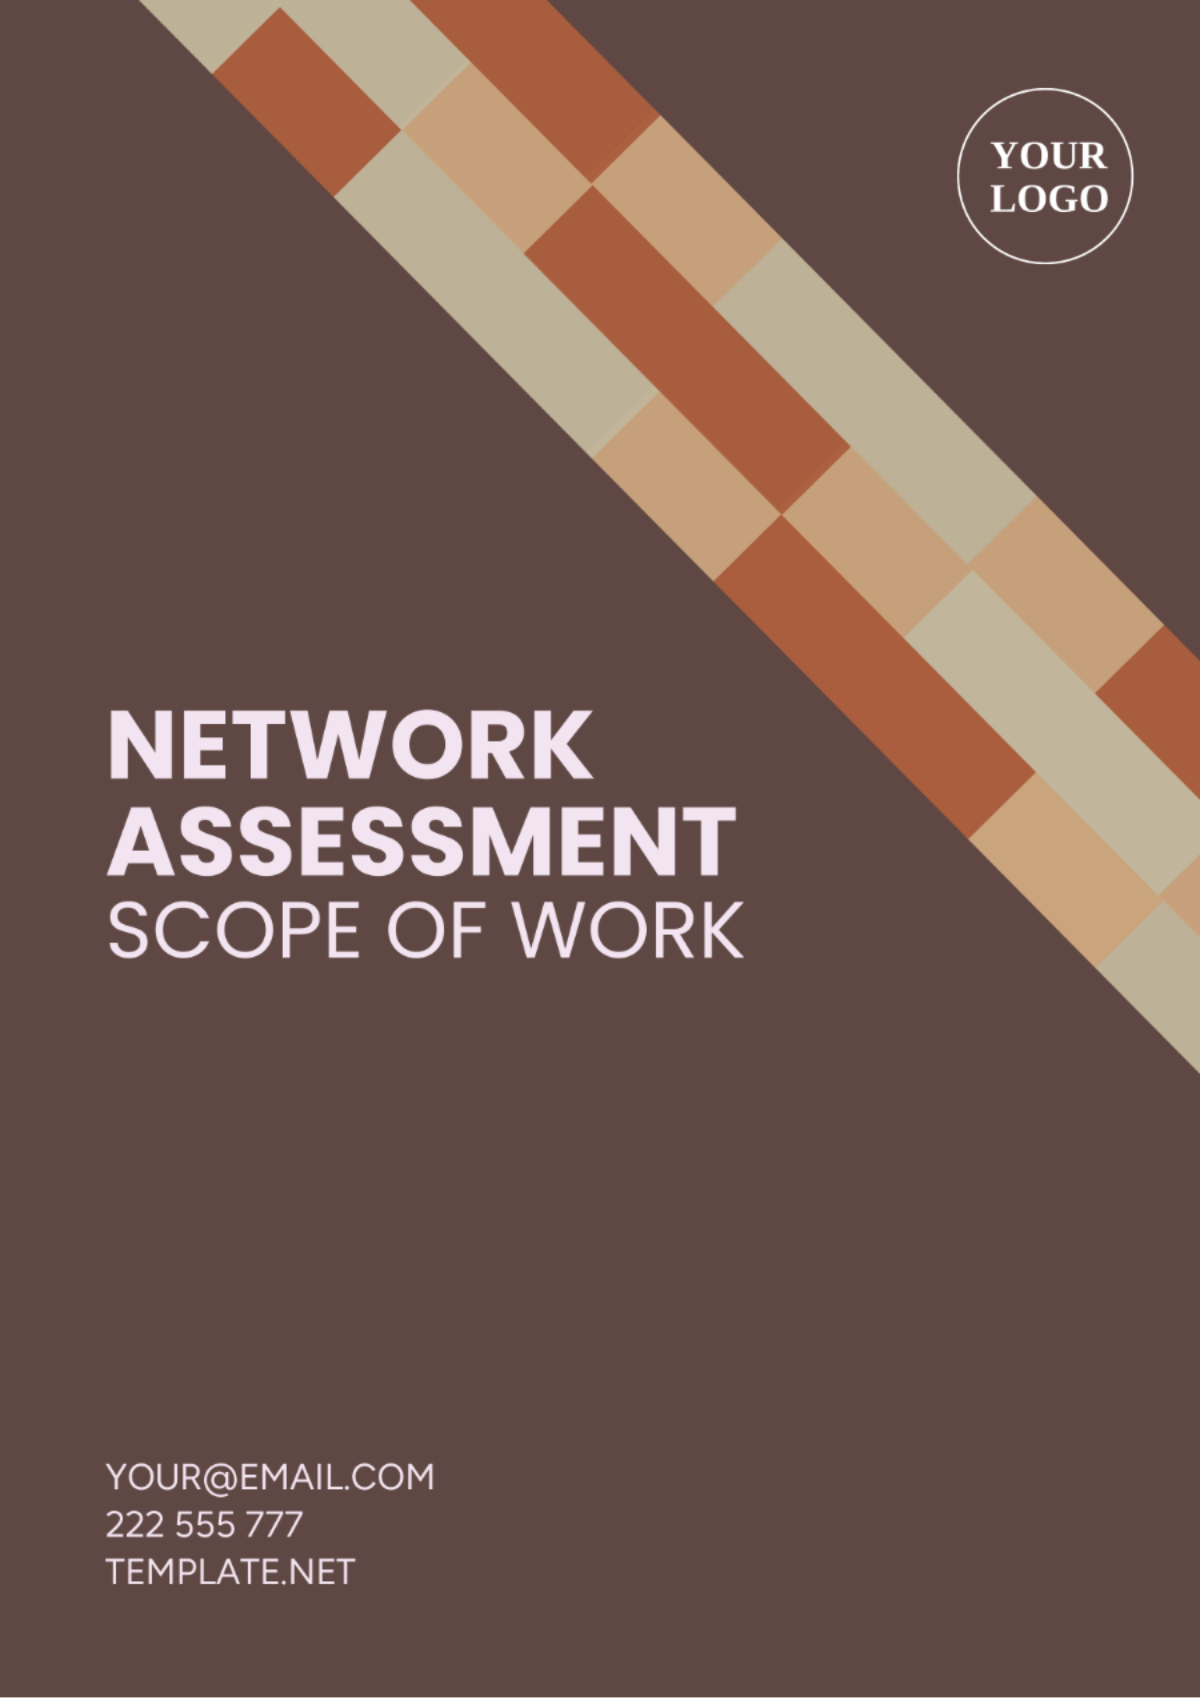 Free Network Assessment Scope of Work Template